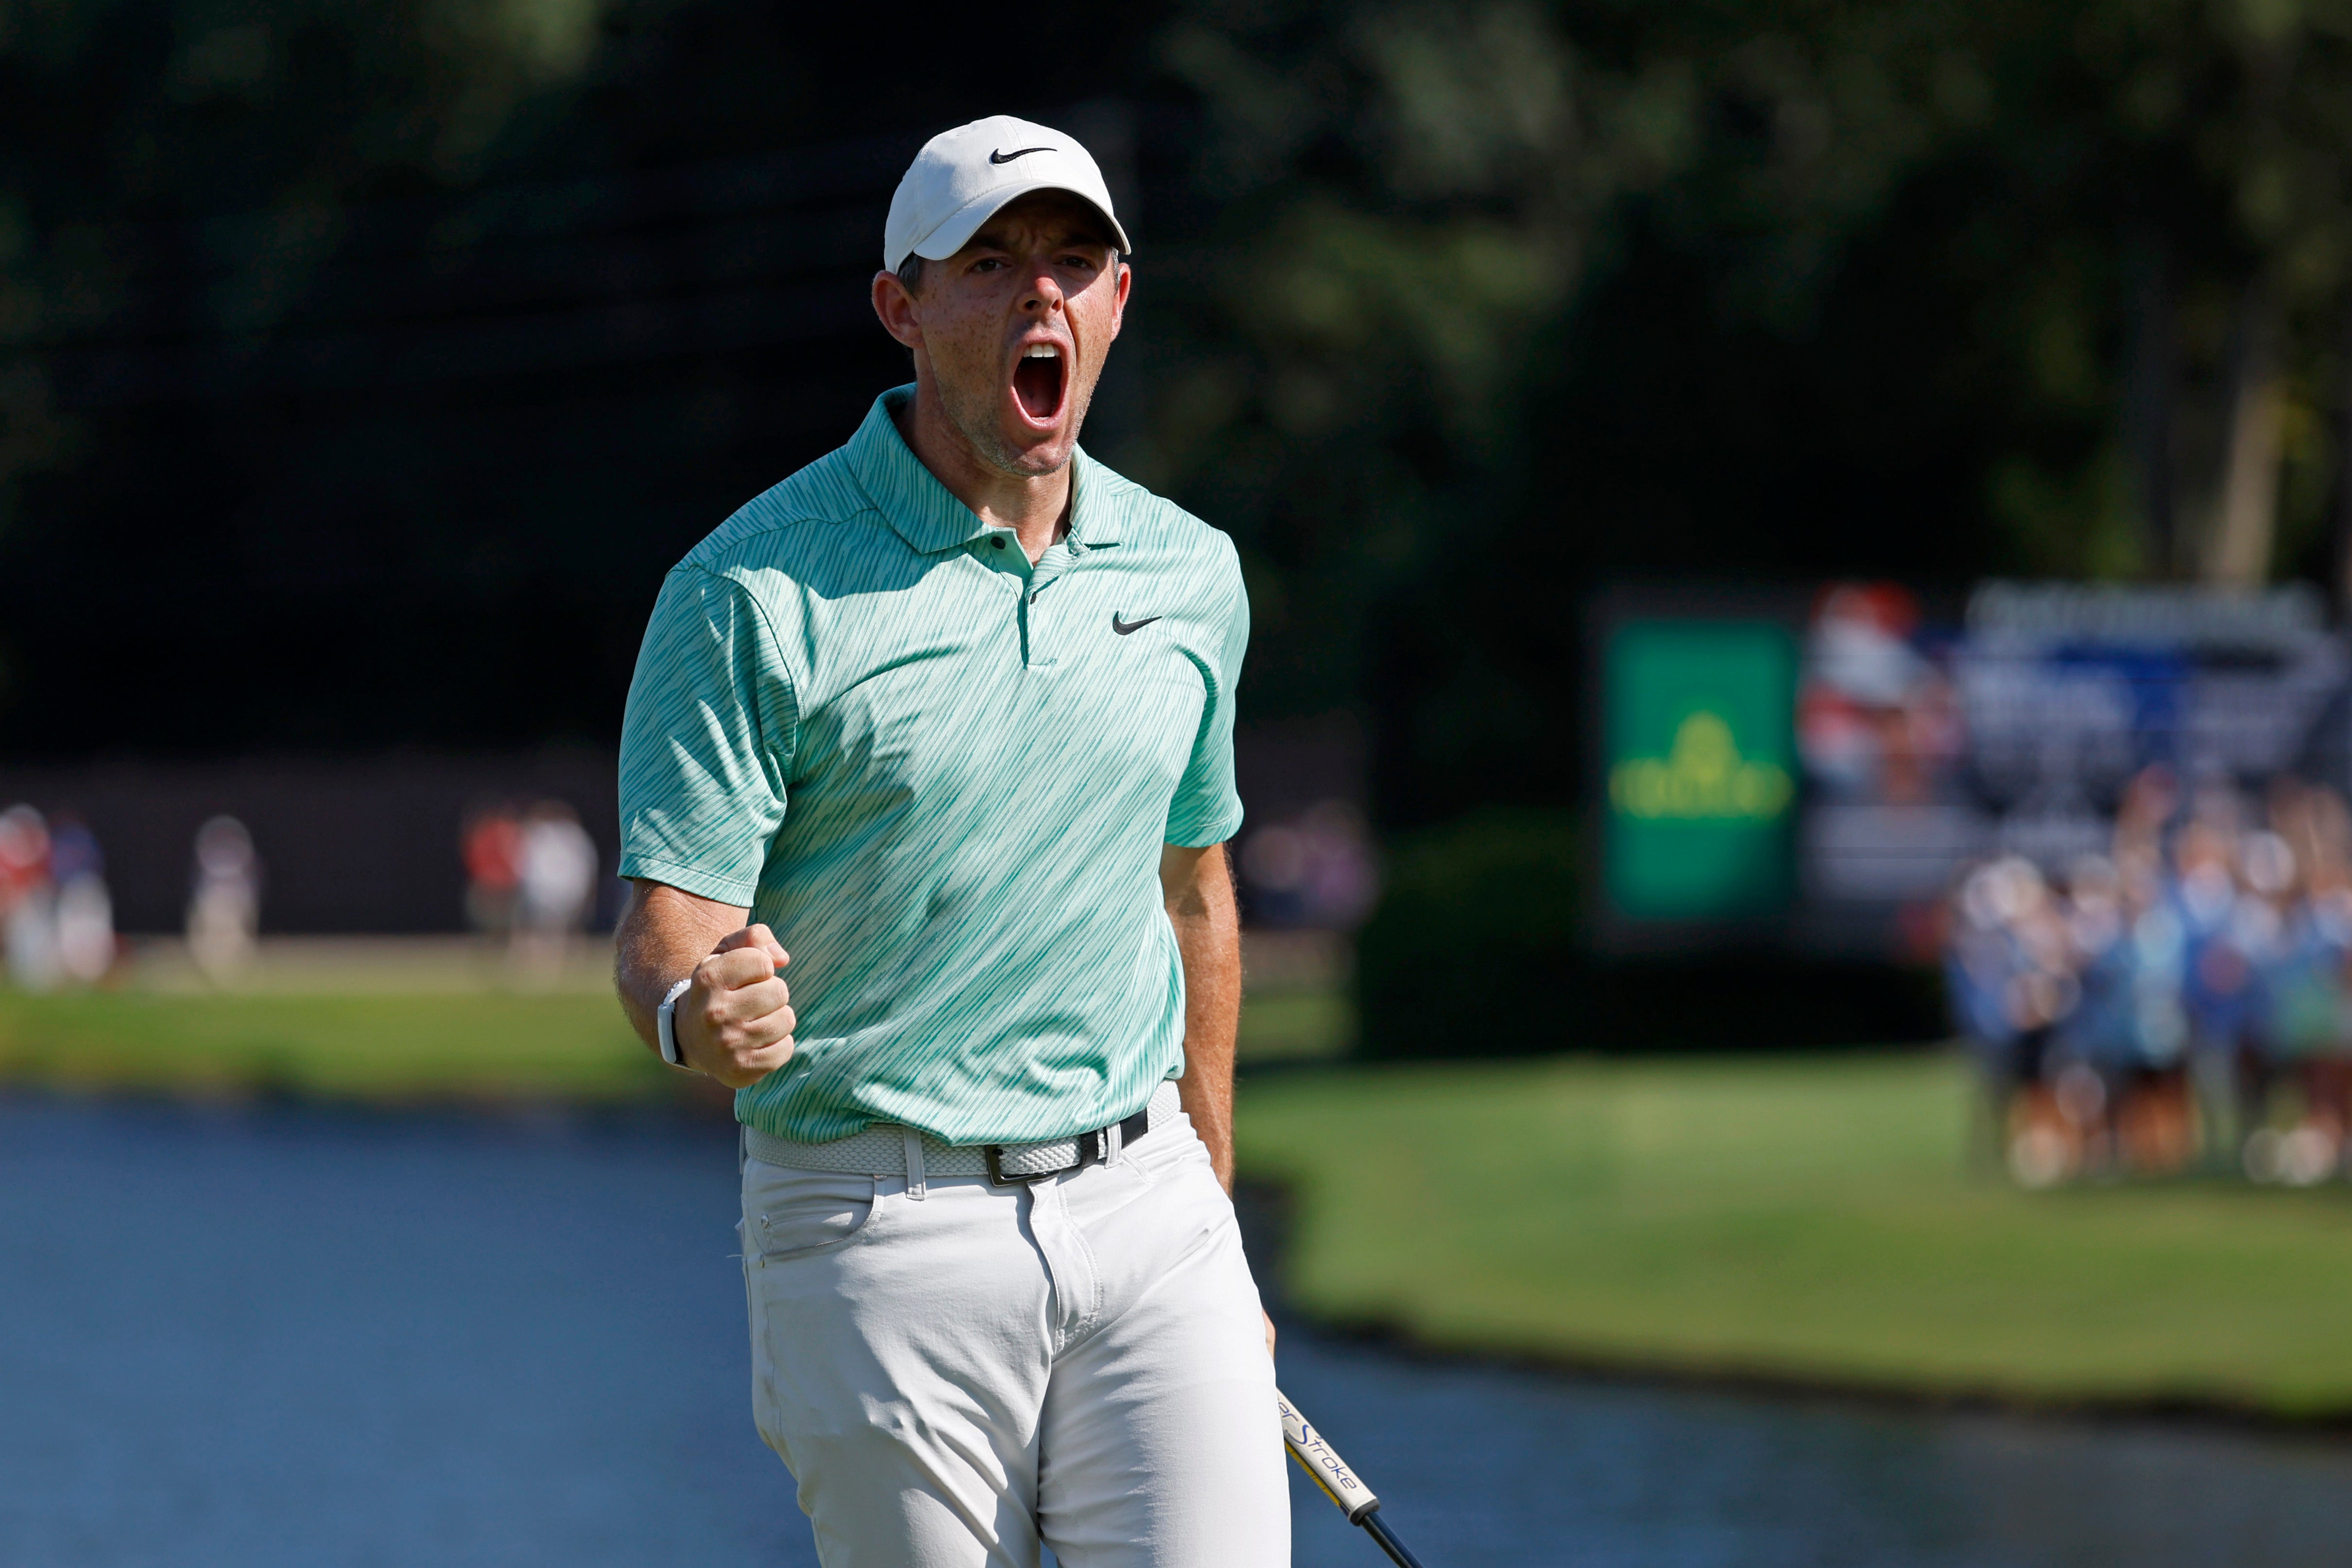 Rory McIlroy reacts after making a birdie putt on the 15th hole in the final round of the Tour Championship ((Jason Getz/Atlanta Journal-Constitution via AP)